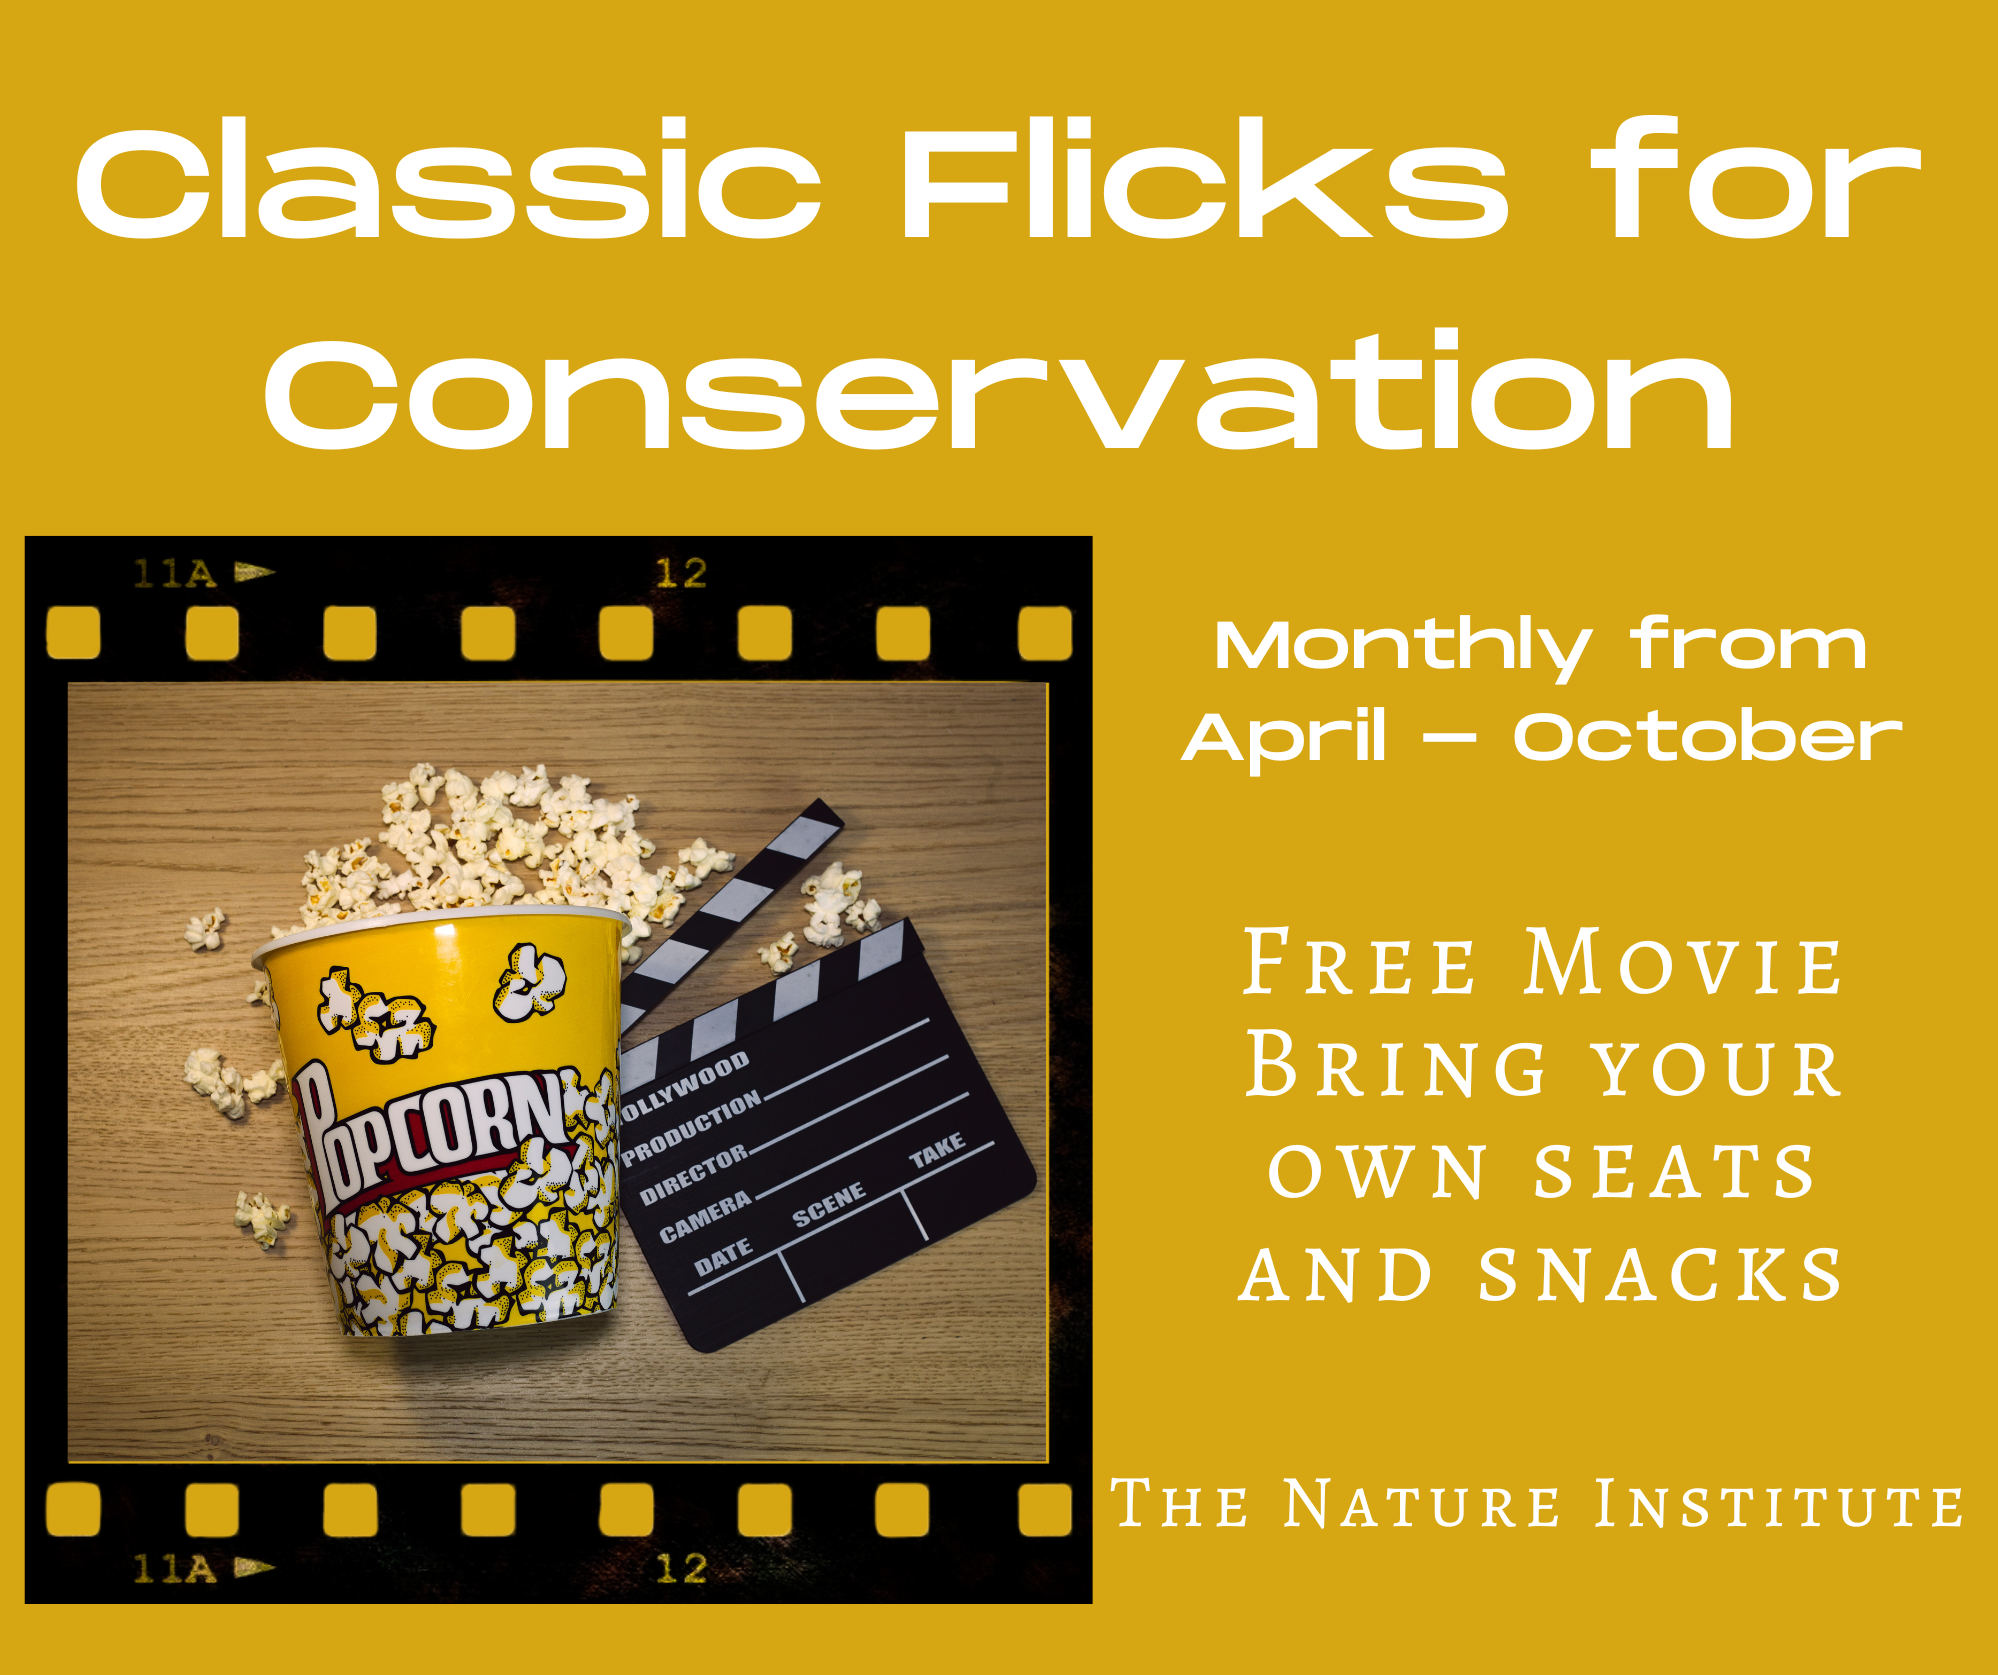 Classic Flicks for Conservation: Wall-E